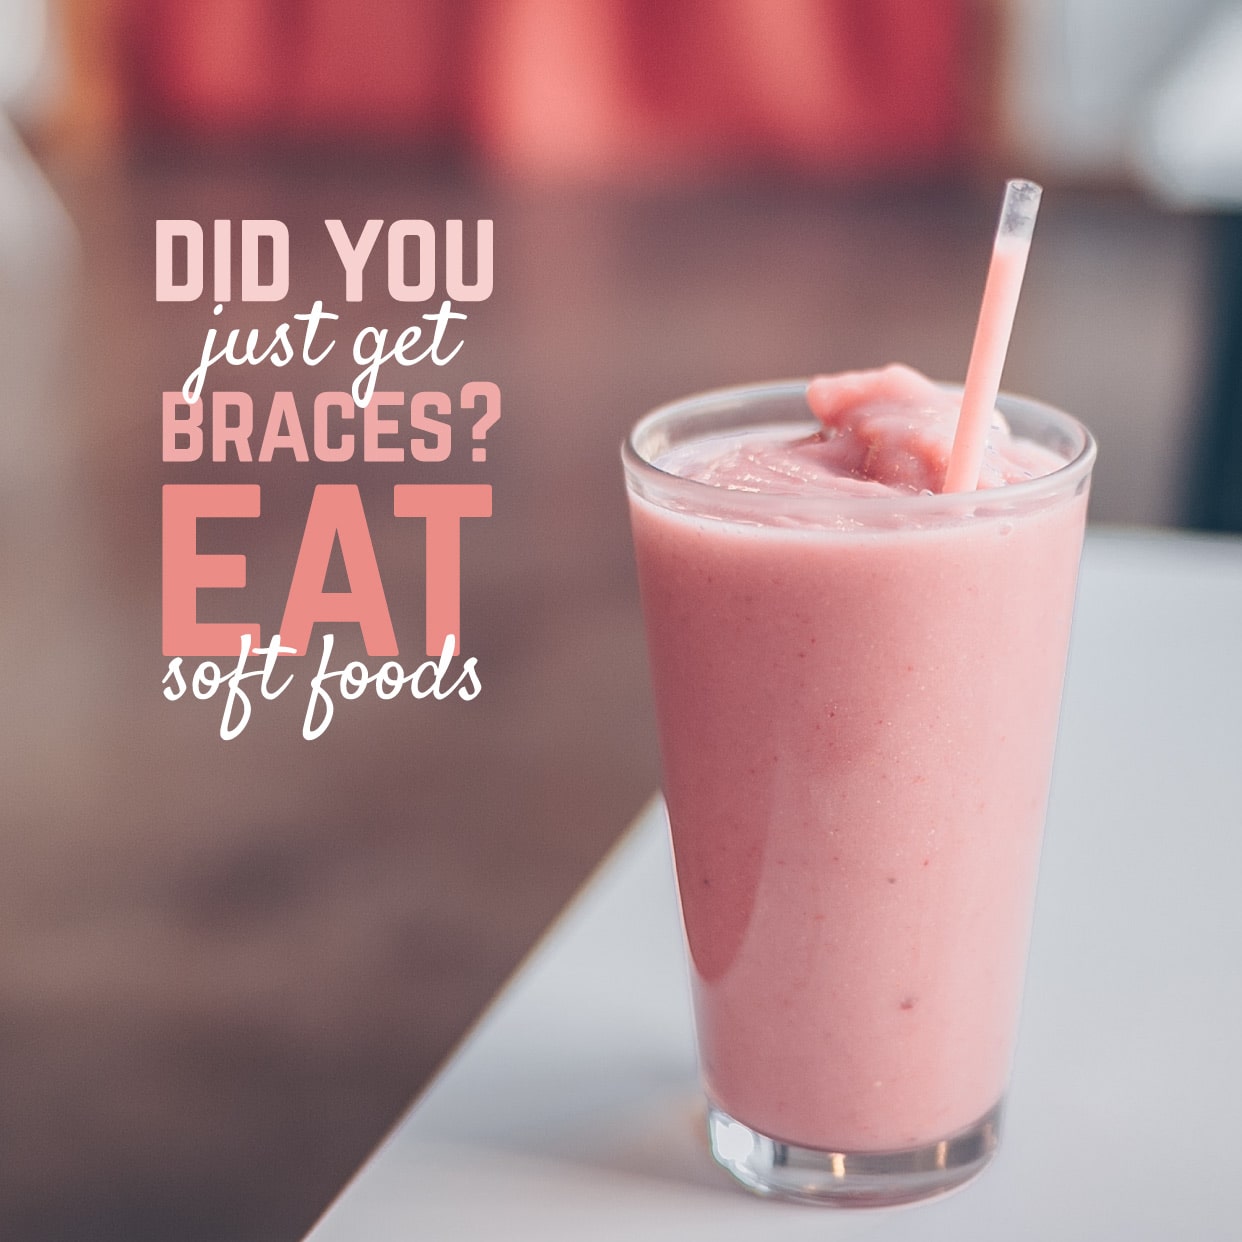 THE FIRST FEW DAYS after getting braces can be tough on your teeth. But ...